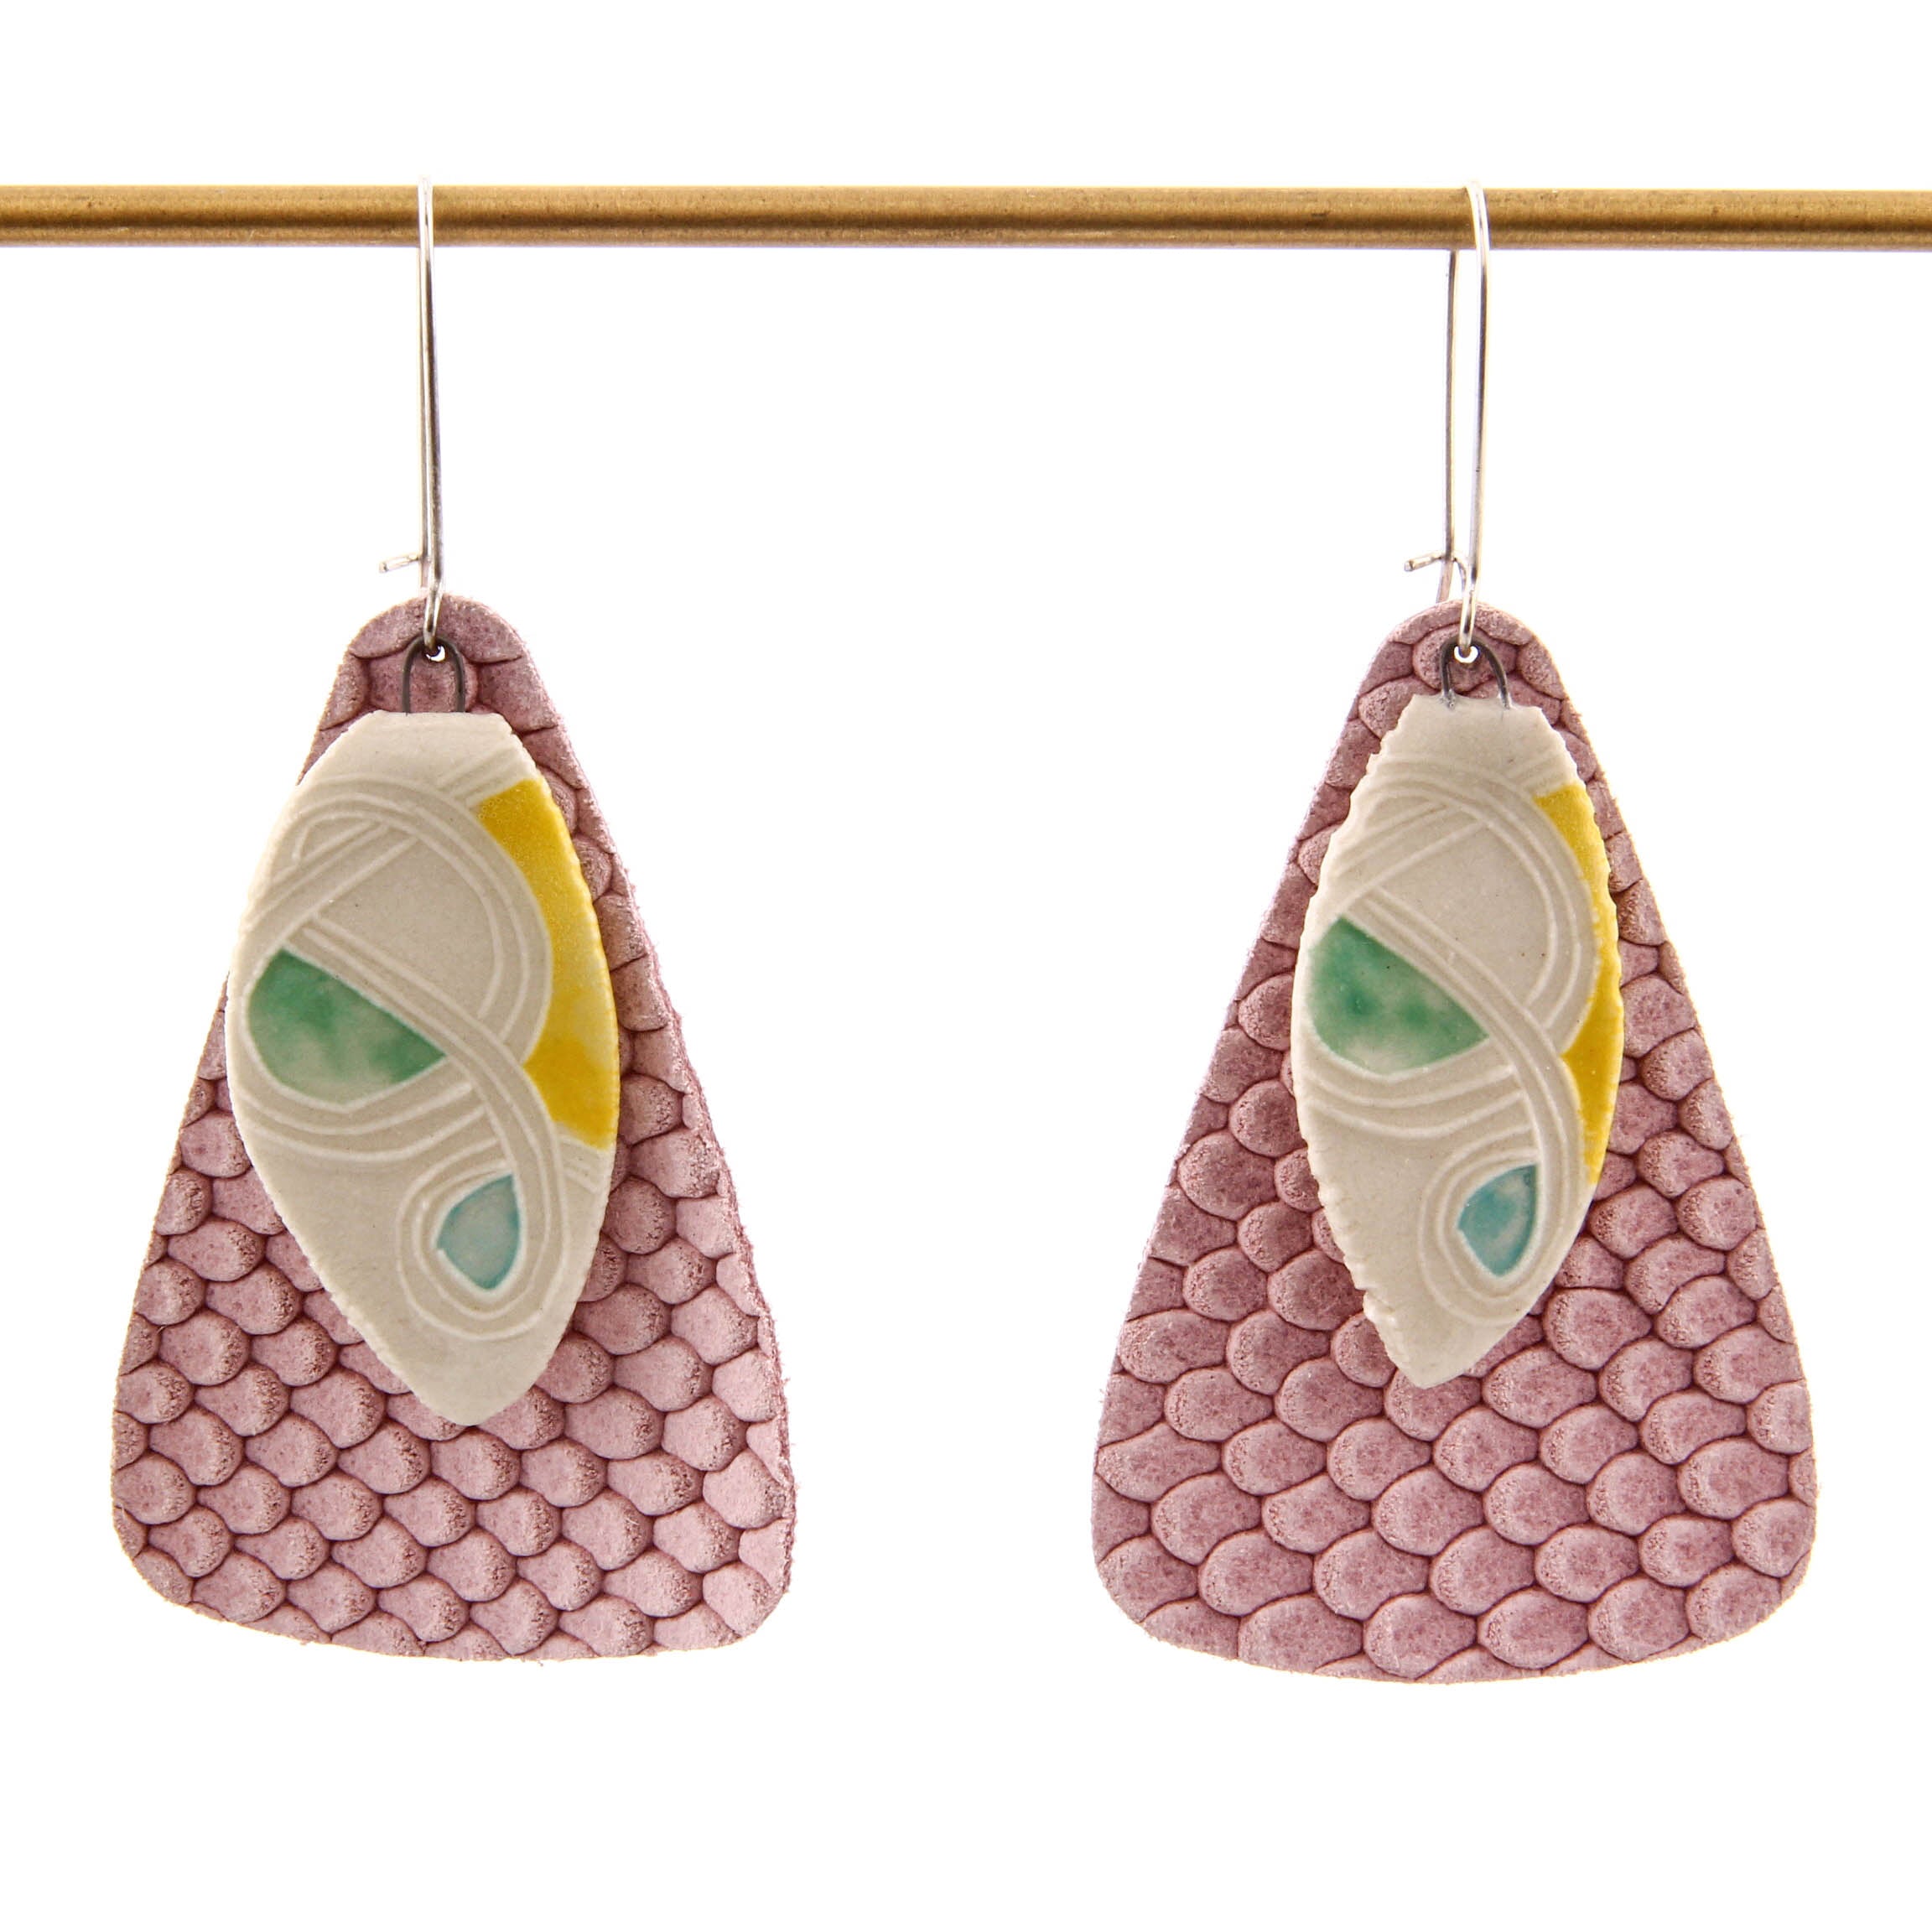 Carole Epp, Long Earrings with Porcelain and Fabric